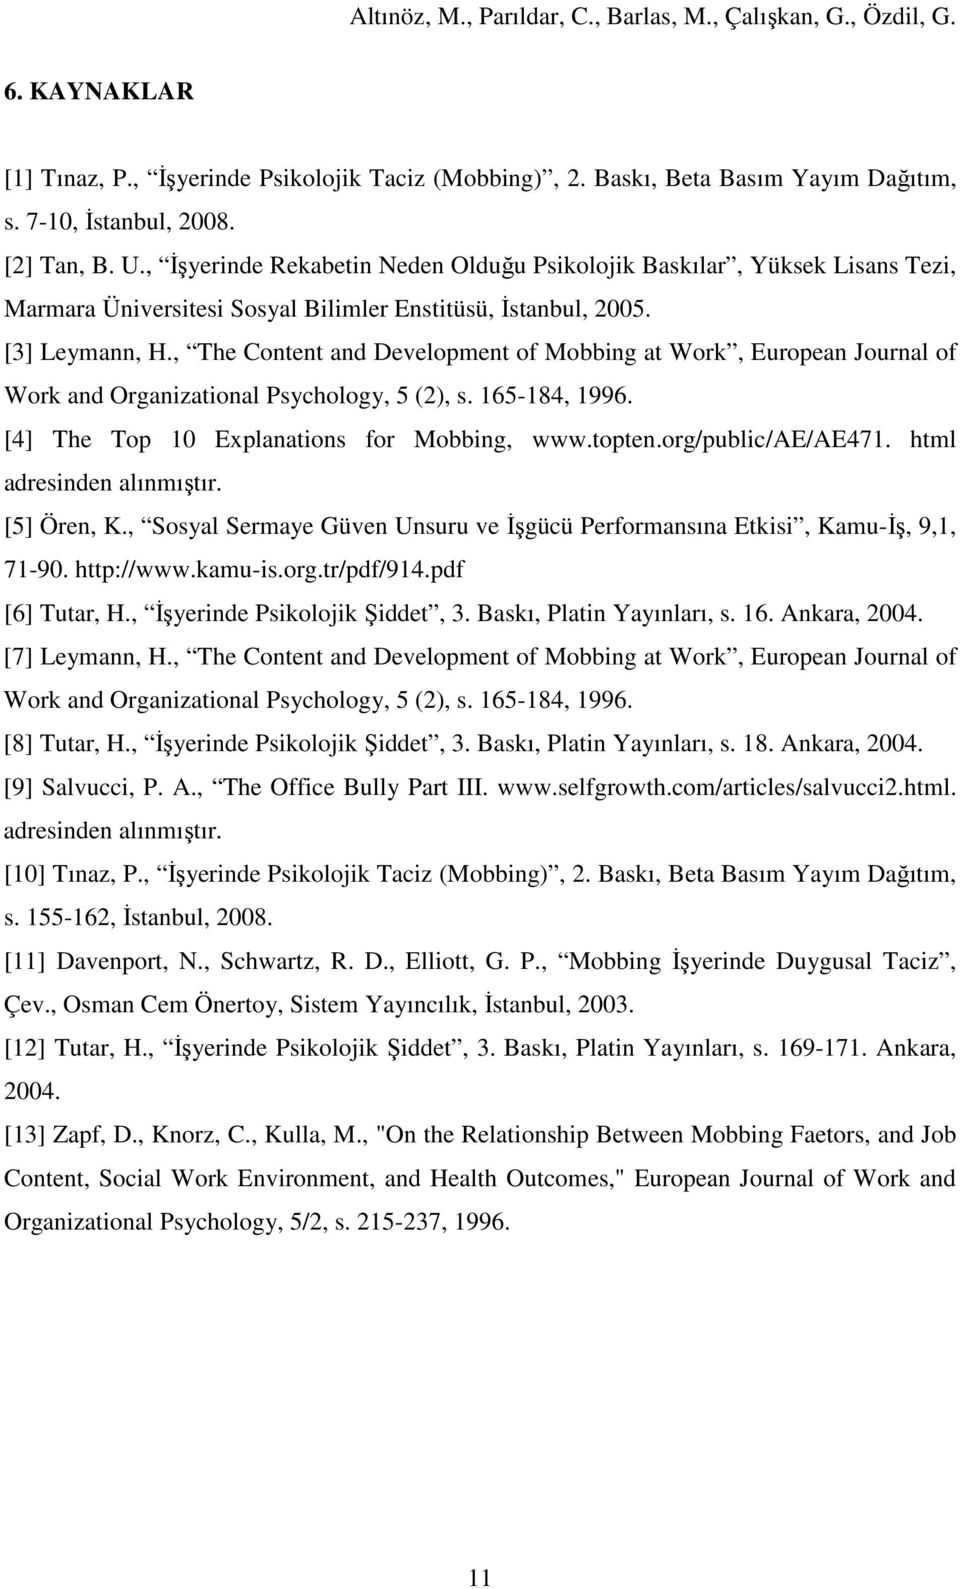 , The Content and Development of Mobbing at Work, European Journal of Work and Organizational Psychology, 5 (2), s. 165-184, 1996. [4] The Top 10 Explanations for Mobbing, www.topten.